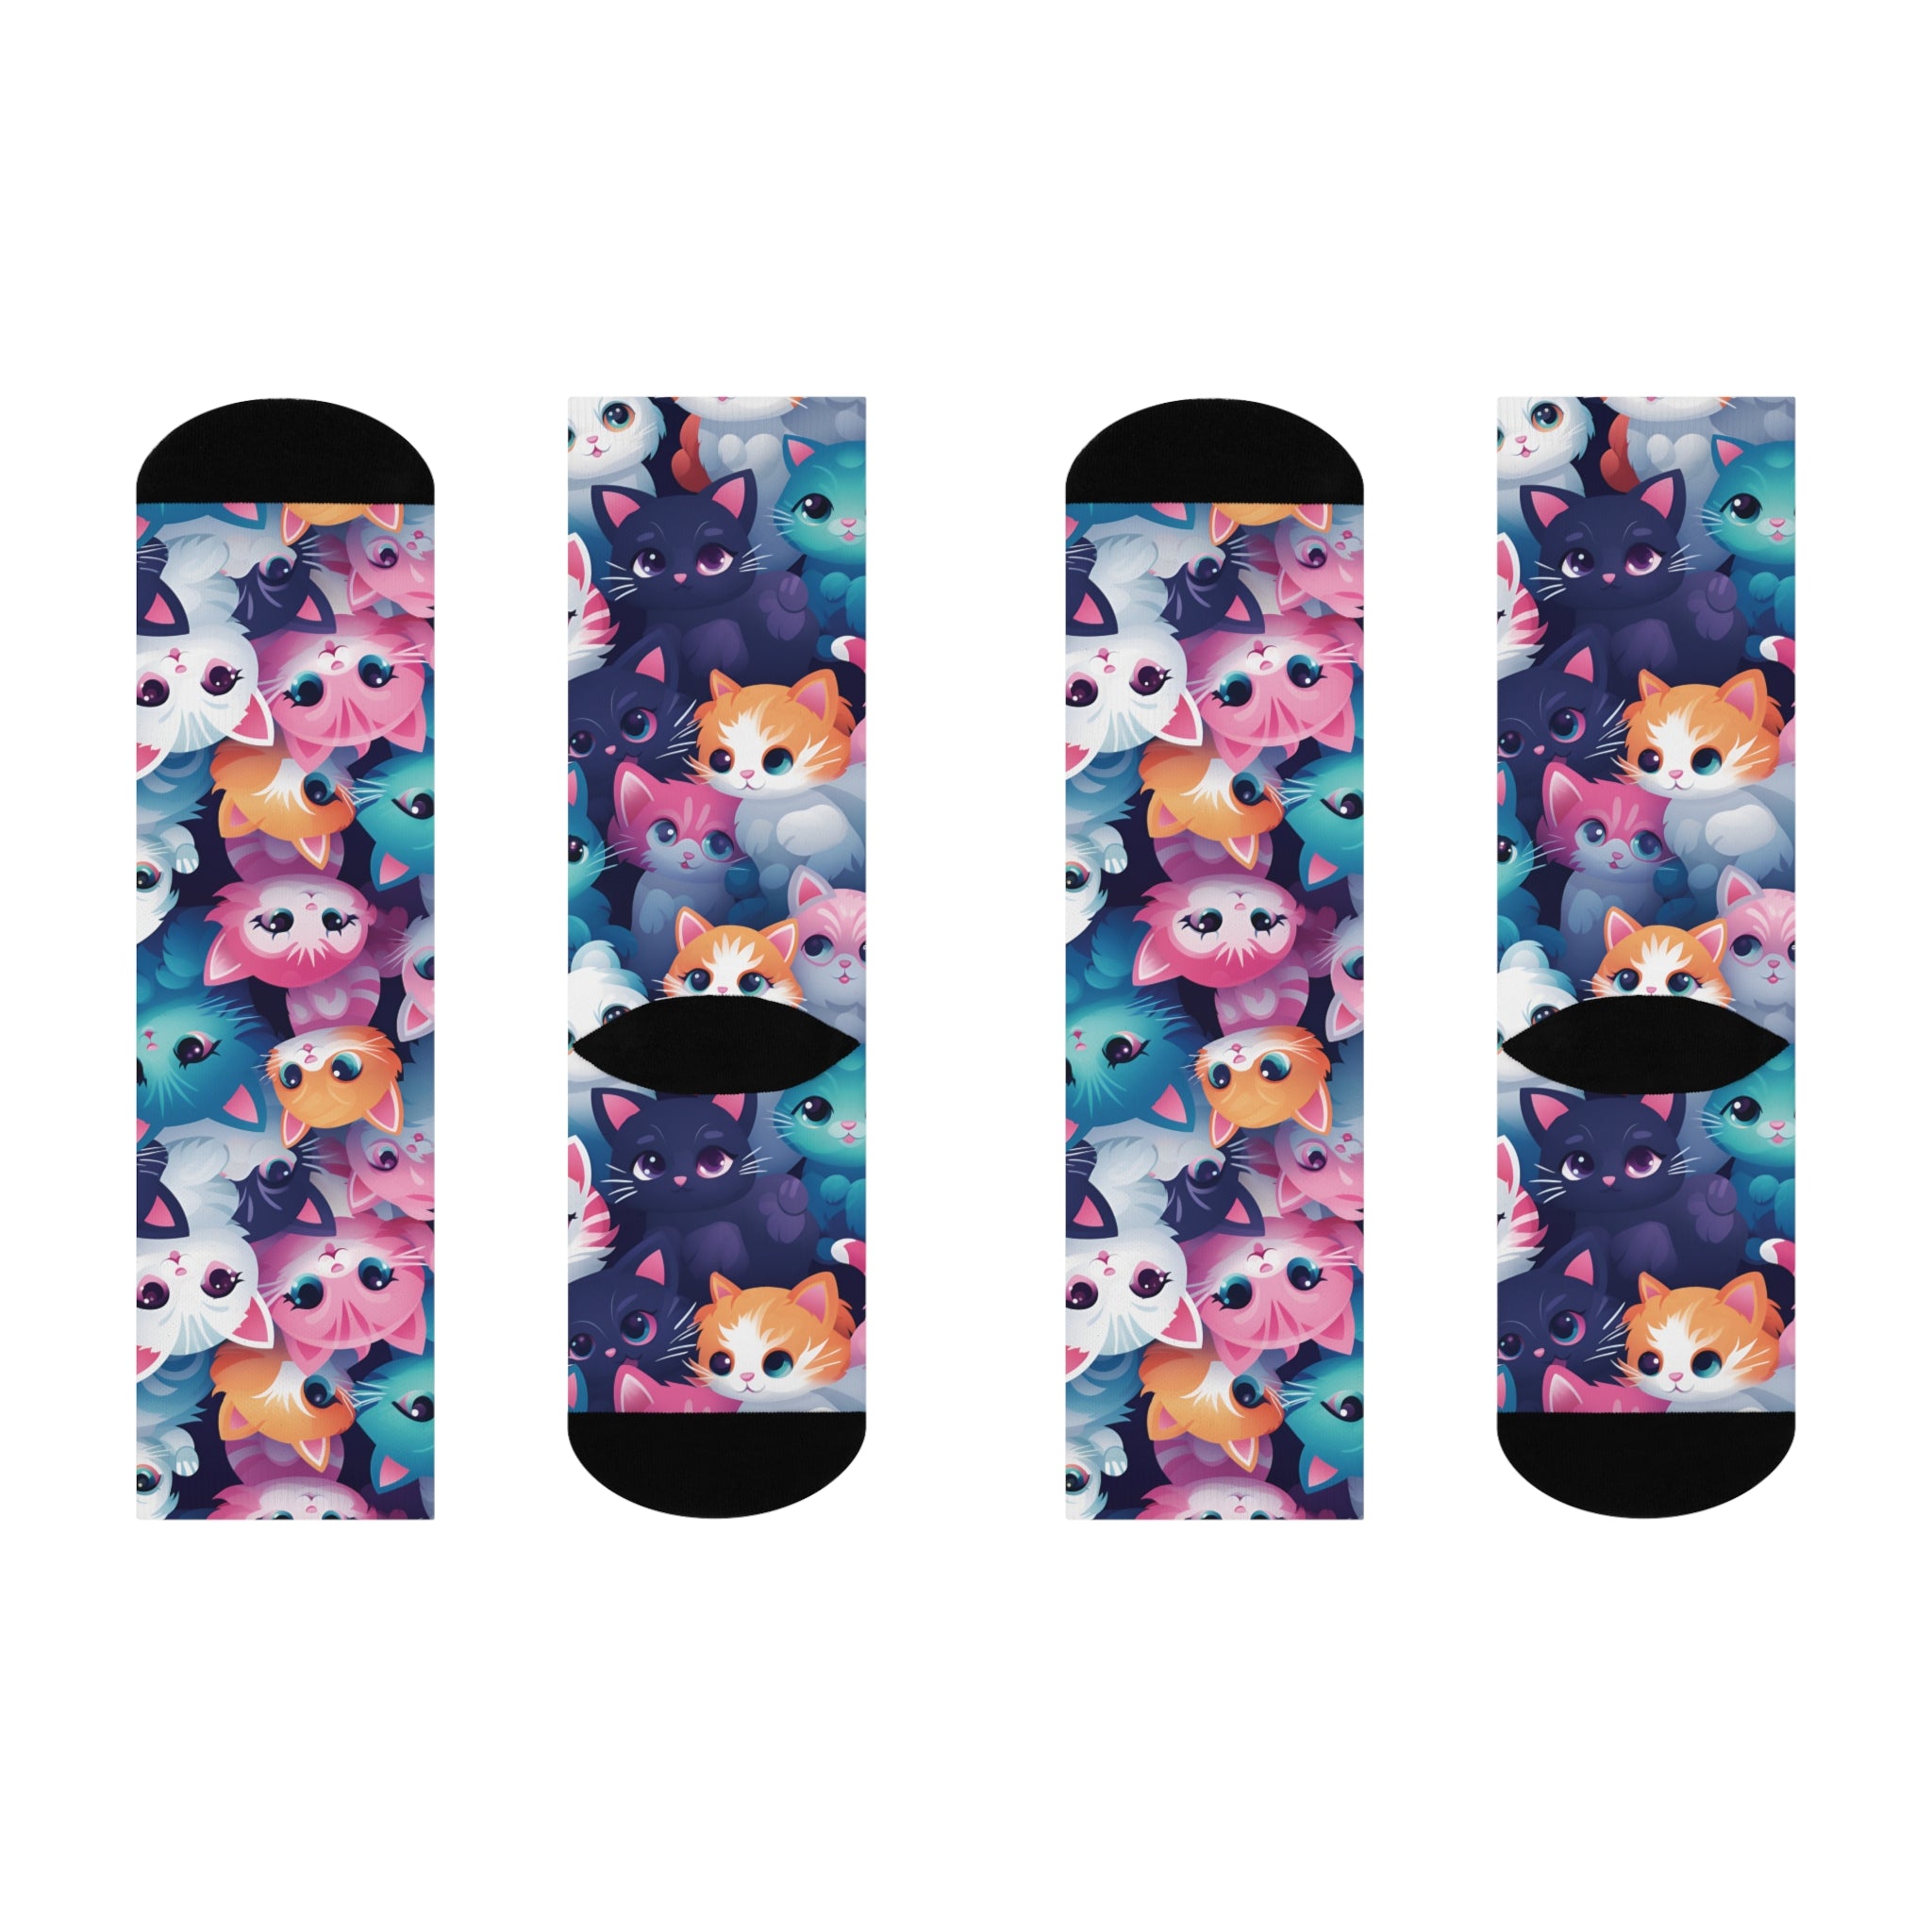 Colorful Animated Cats Cushioned Crew Socks